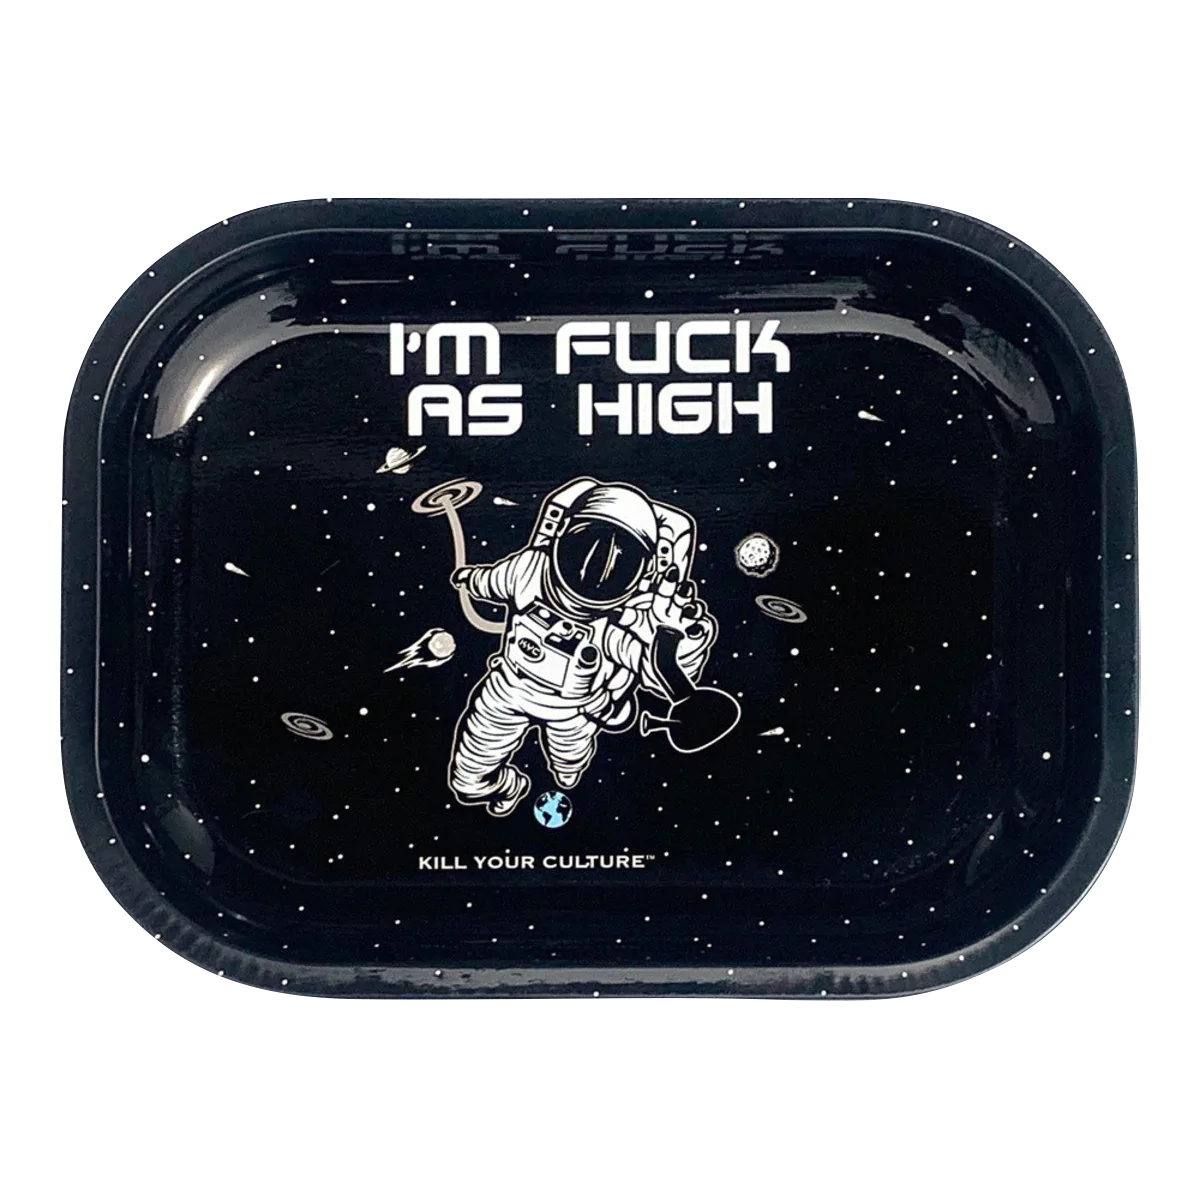 Kill Your Culture astronaut-themed metal rolling tray, 7" x 5.5", perfect for dry herbs